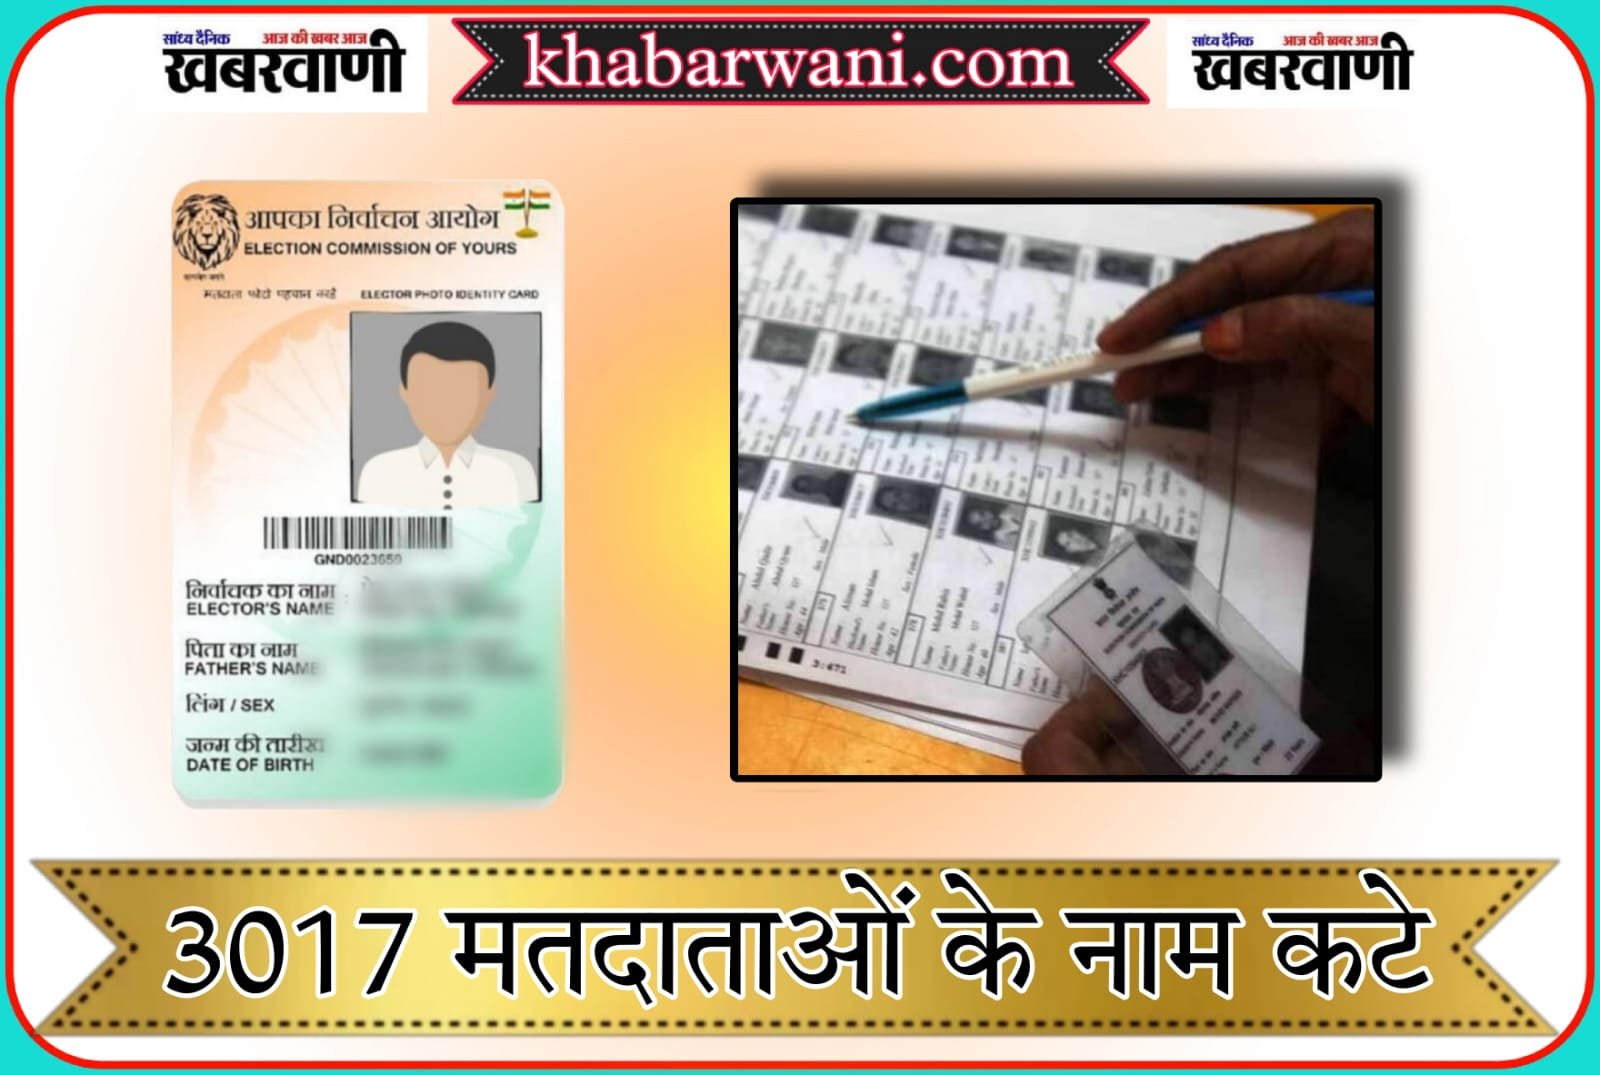 Betul Voter List - Names of 3017 voters removed from the voter list in the district.